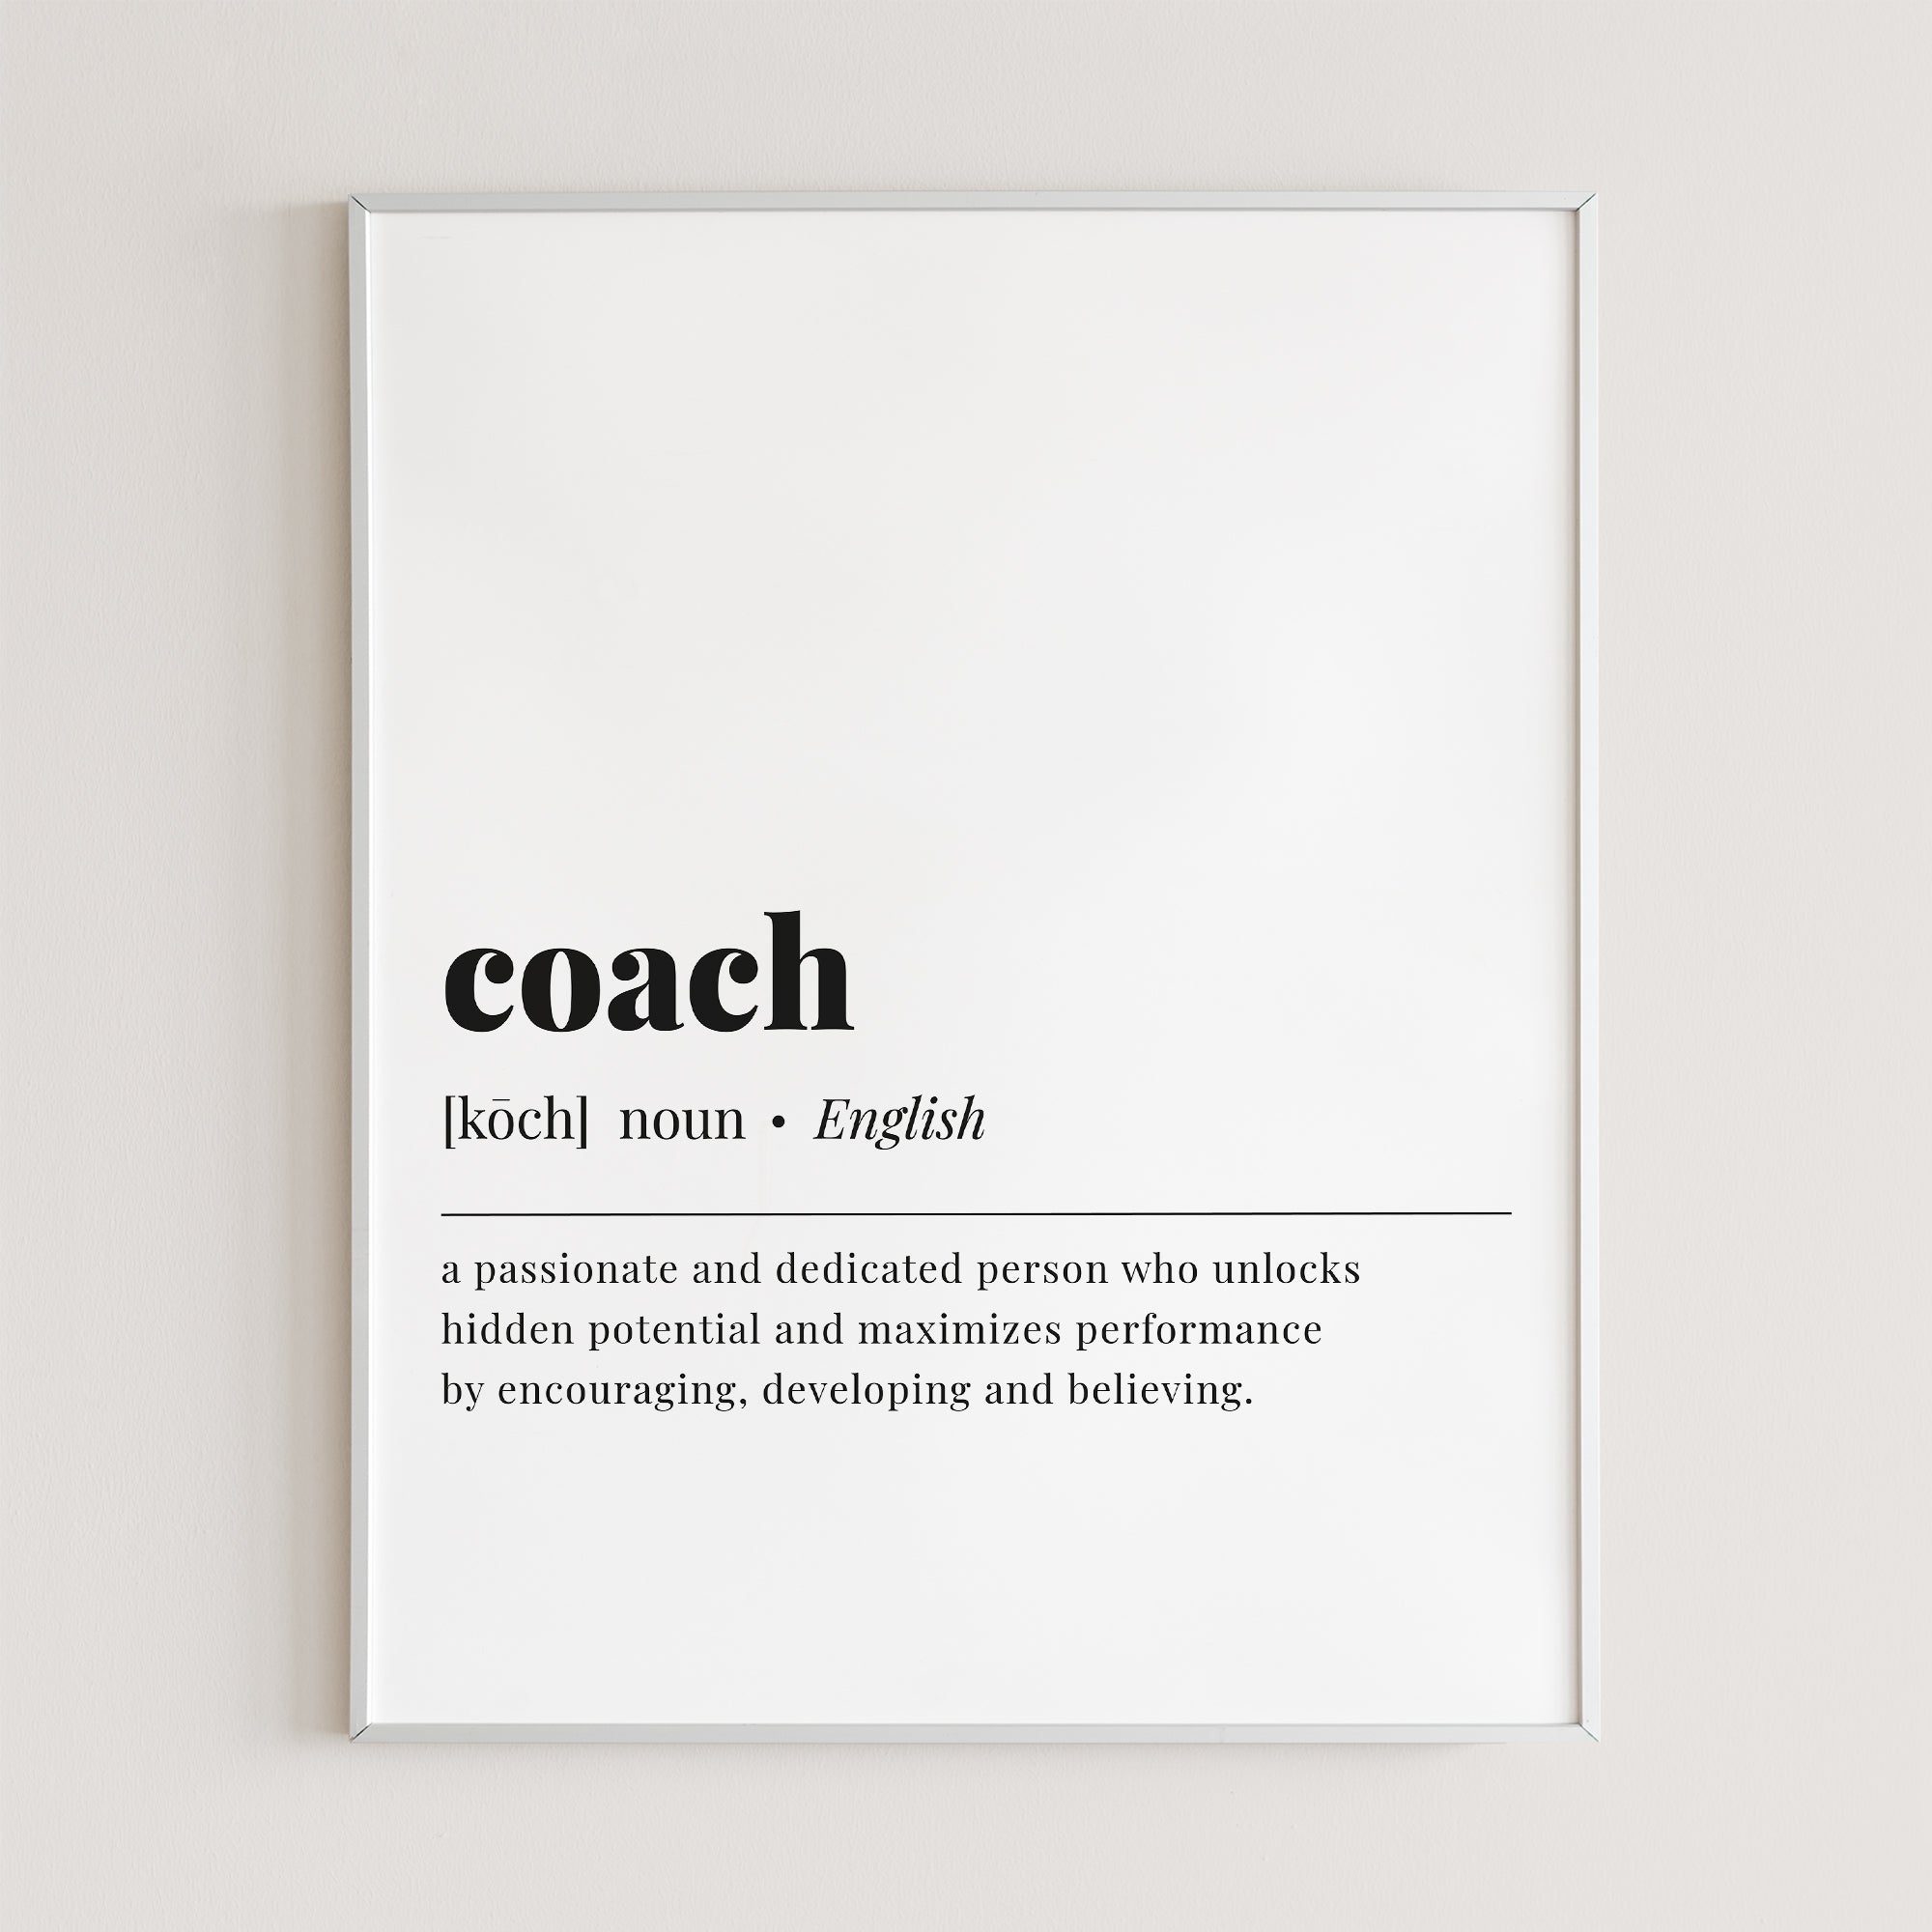 Coach Definition Print Instant Download by LittleSizzle